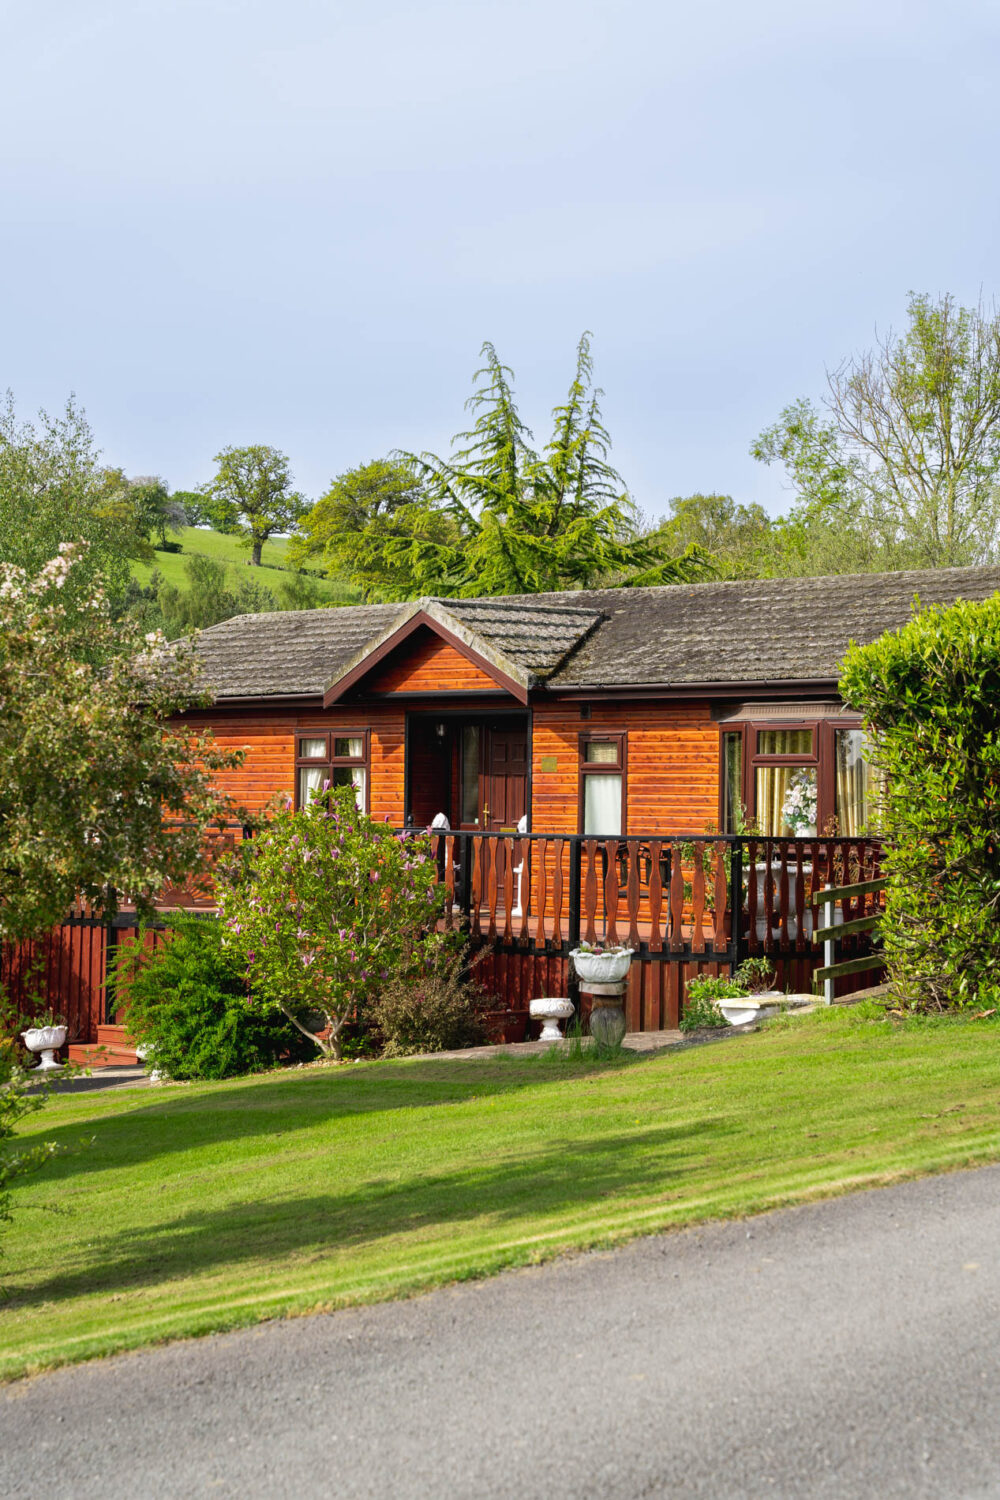 Holiday Homes | Oakwood Valley Lodges